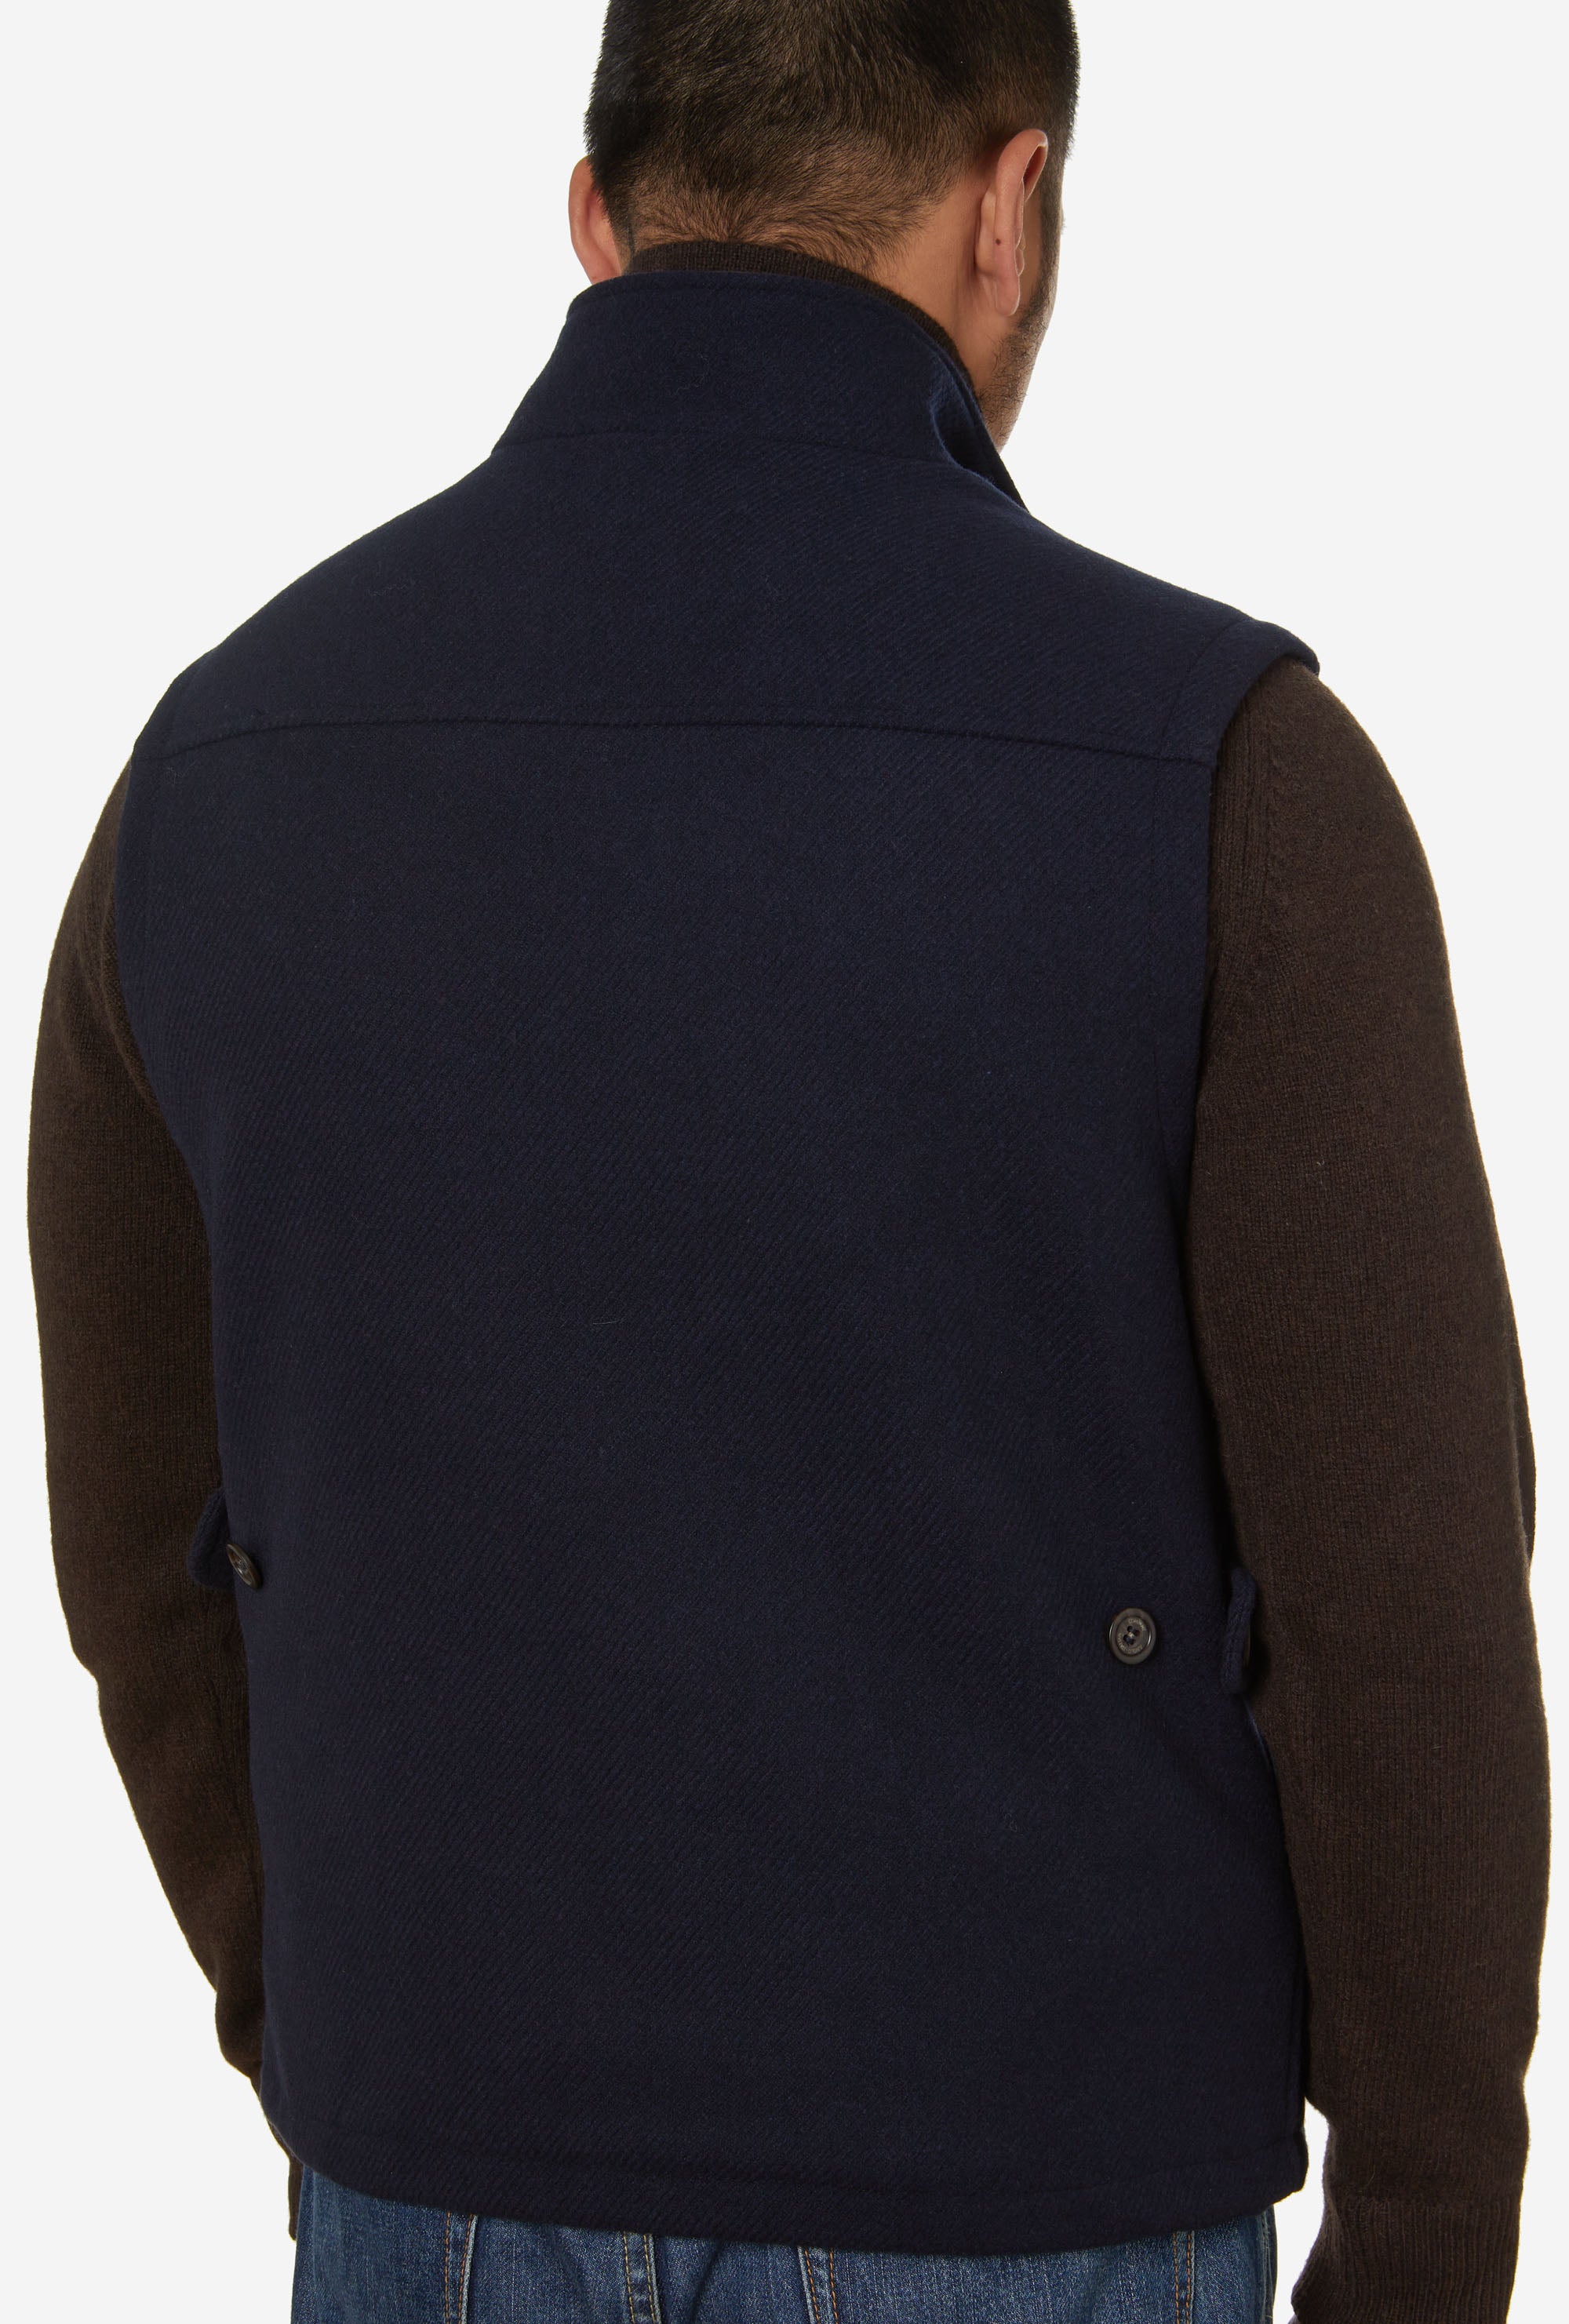 Gilet Wool-Cashmere Navy